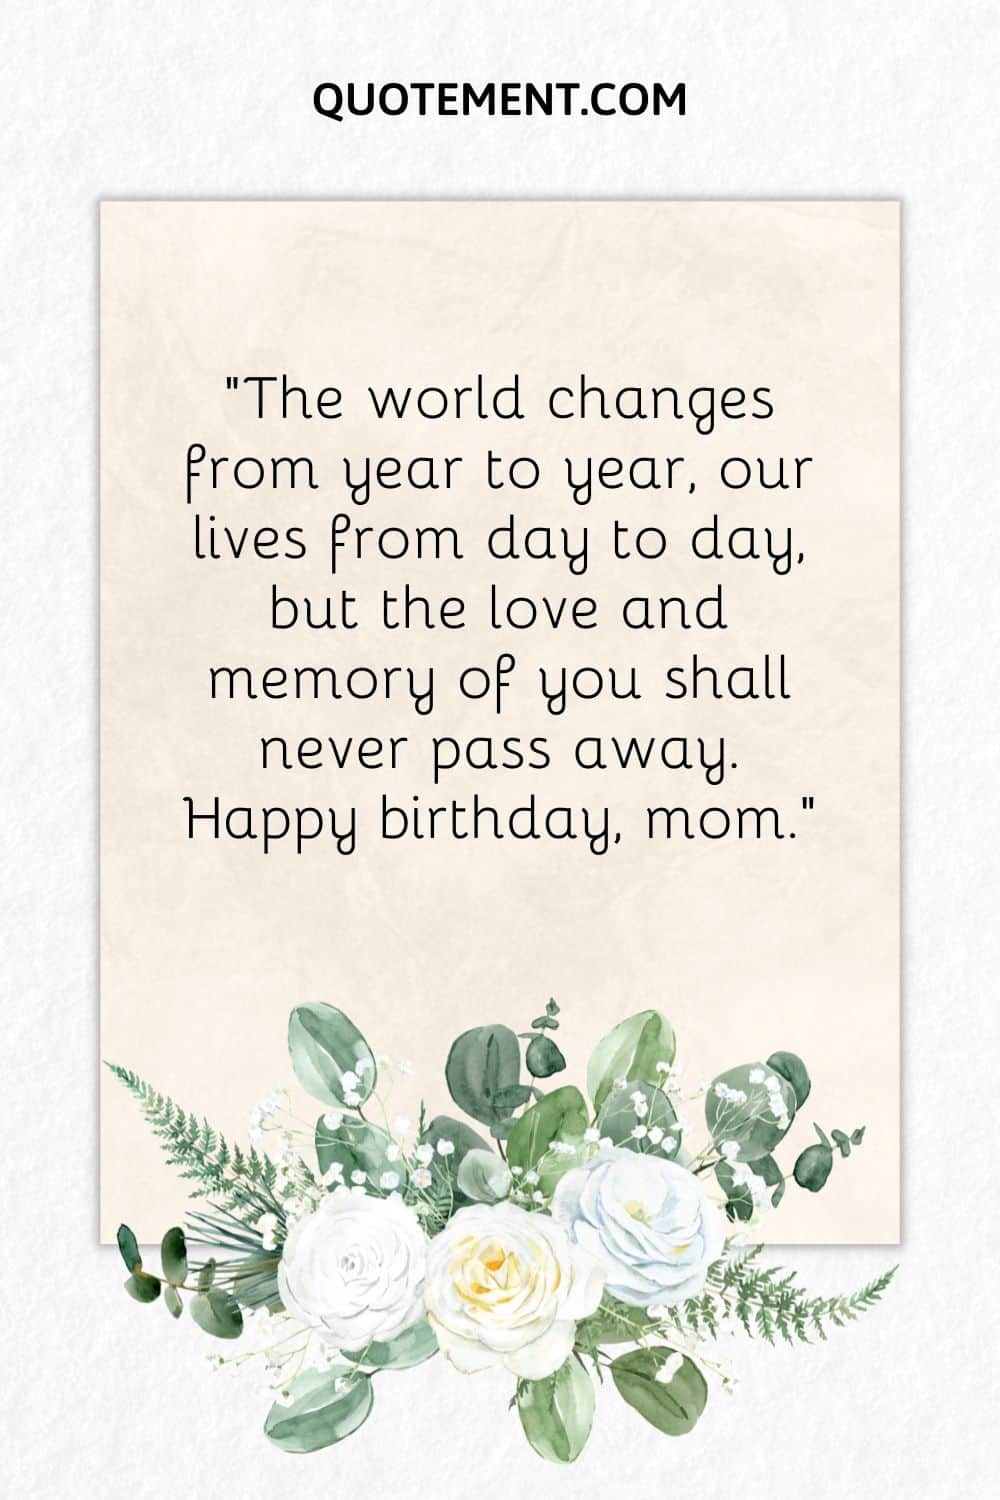 image of white roses representing the loveliest mom in heaven birthday wish
